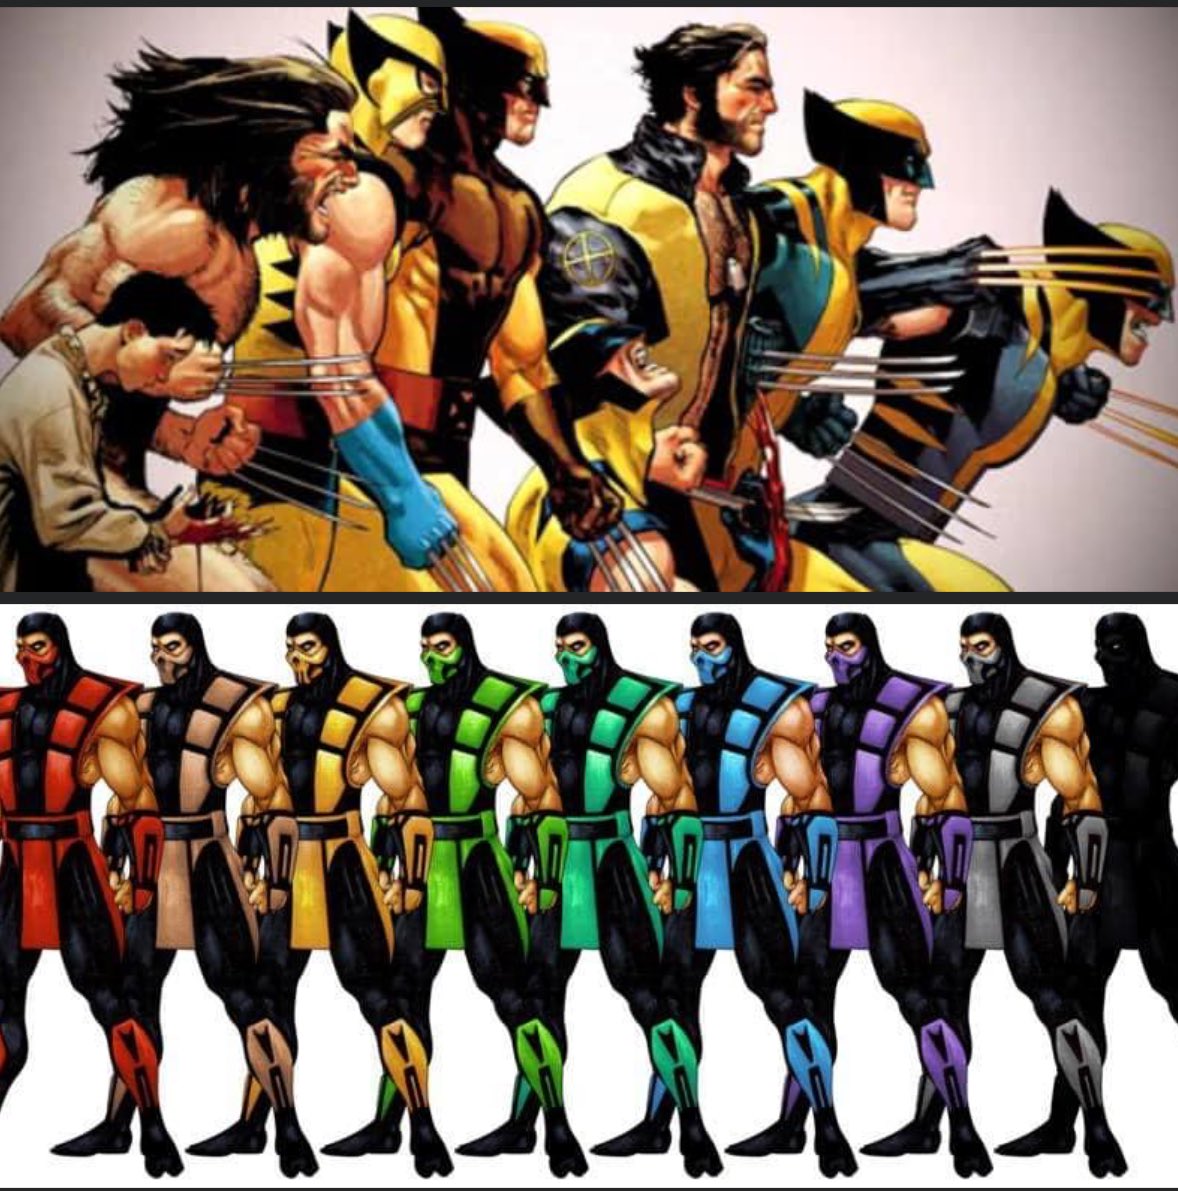 8 Versions of #Wolverine❌

🆚

9 #MortalKombat Ninja’s

(Marvel Comics VS Mortal Kombat)

-Location: Forest Park
-Pictured Members

Who wins, and why⁉️

#whowouldwin #deathbattle #SHPOLL24